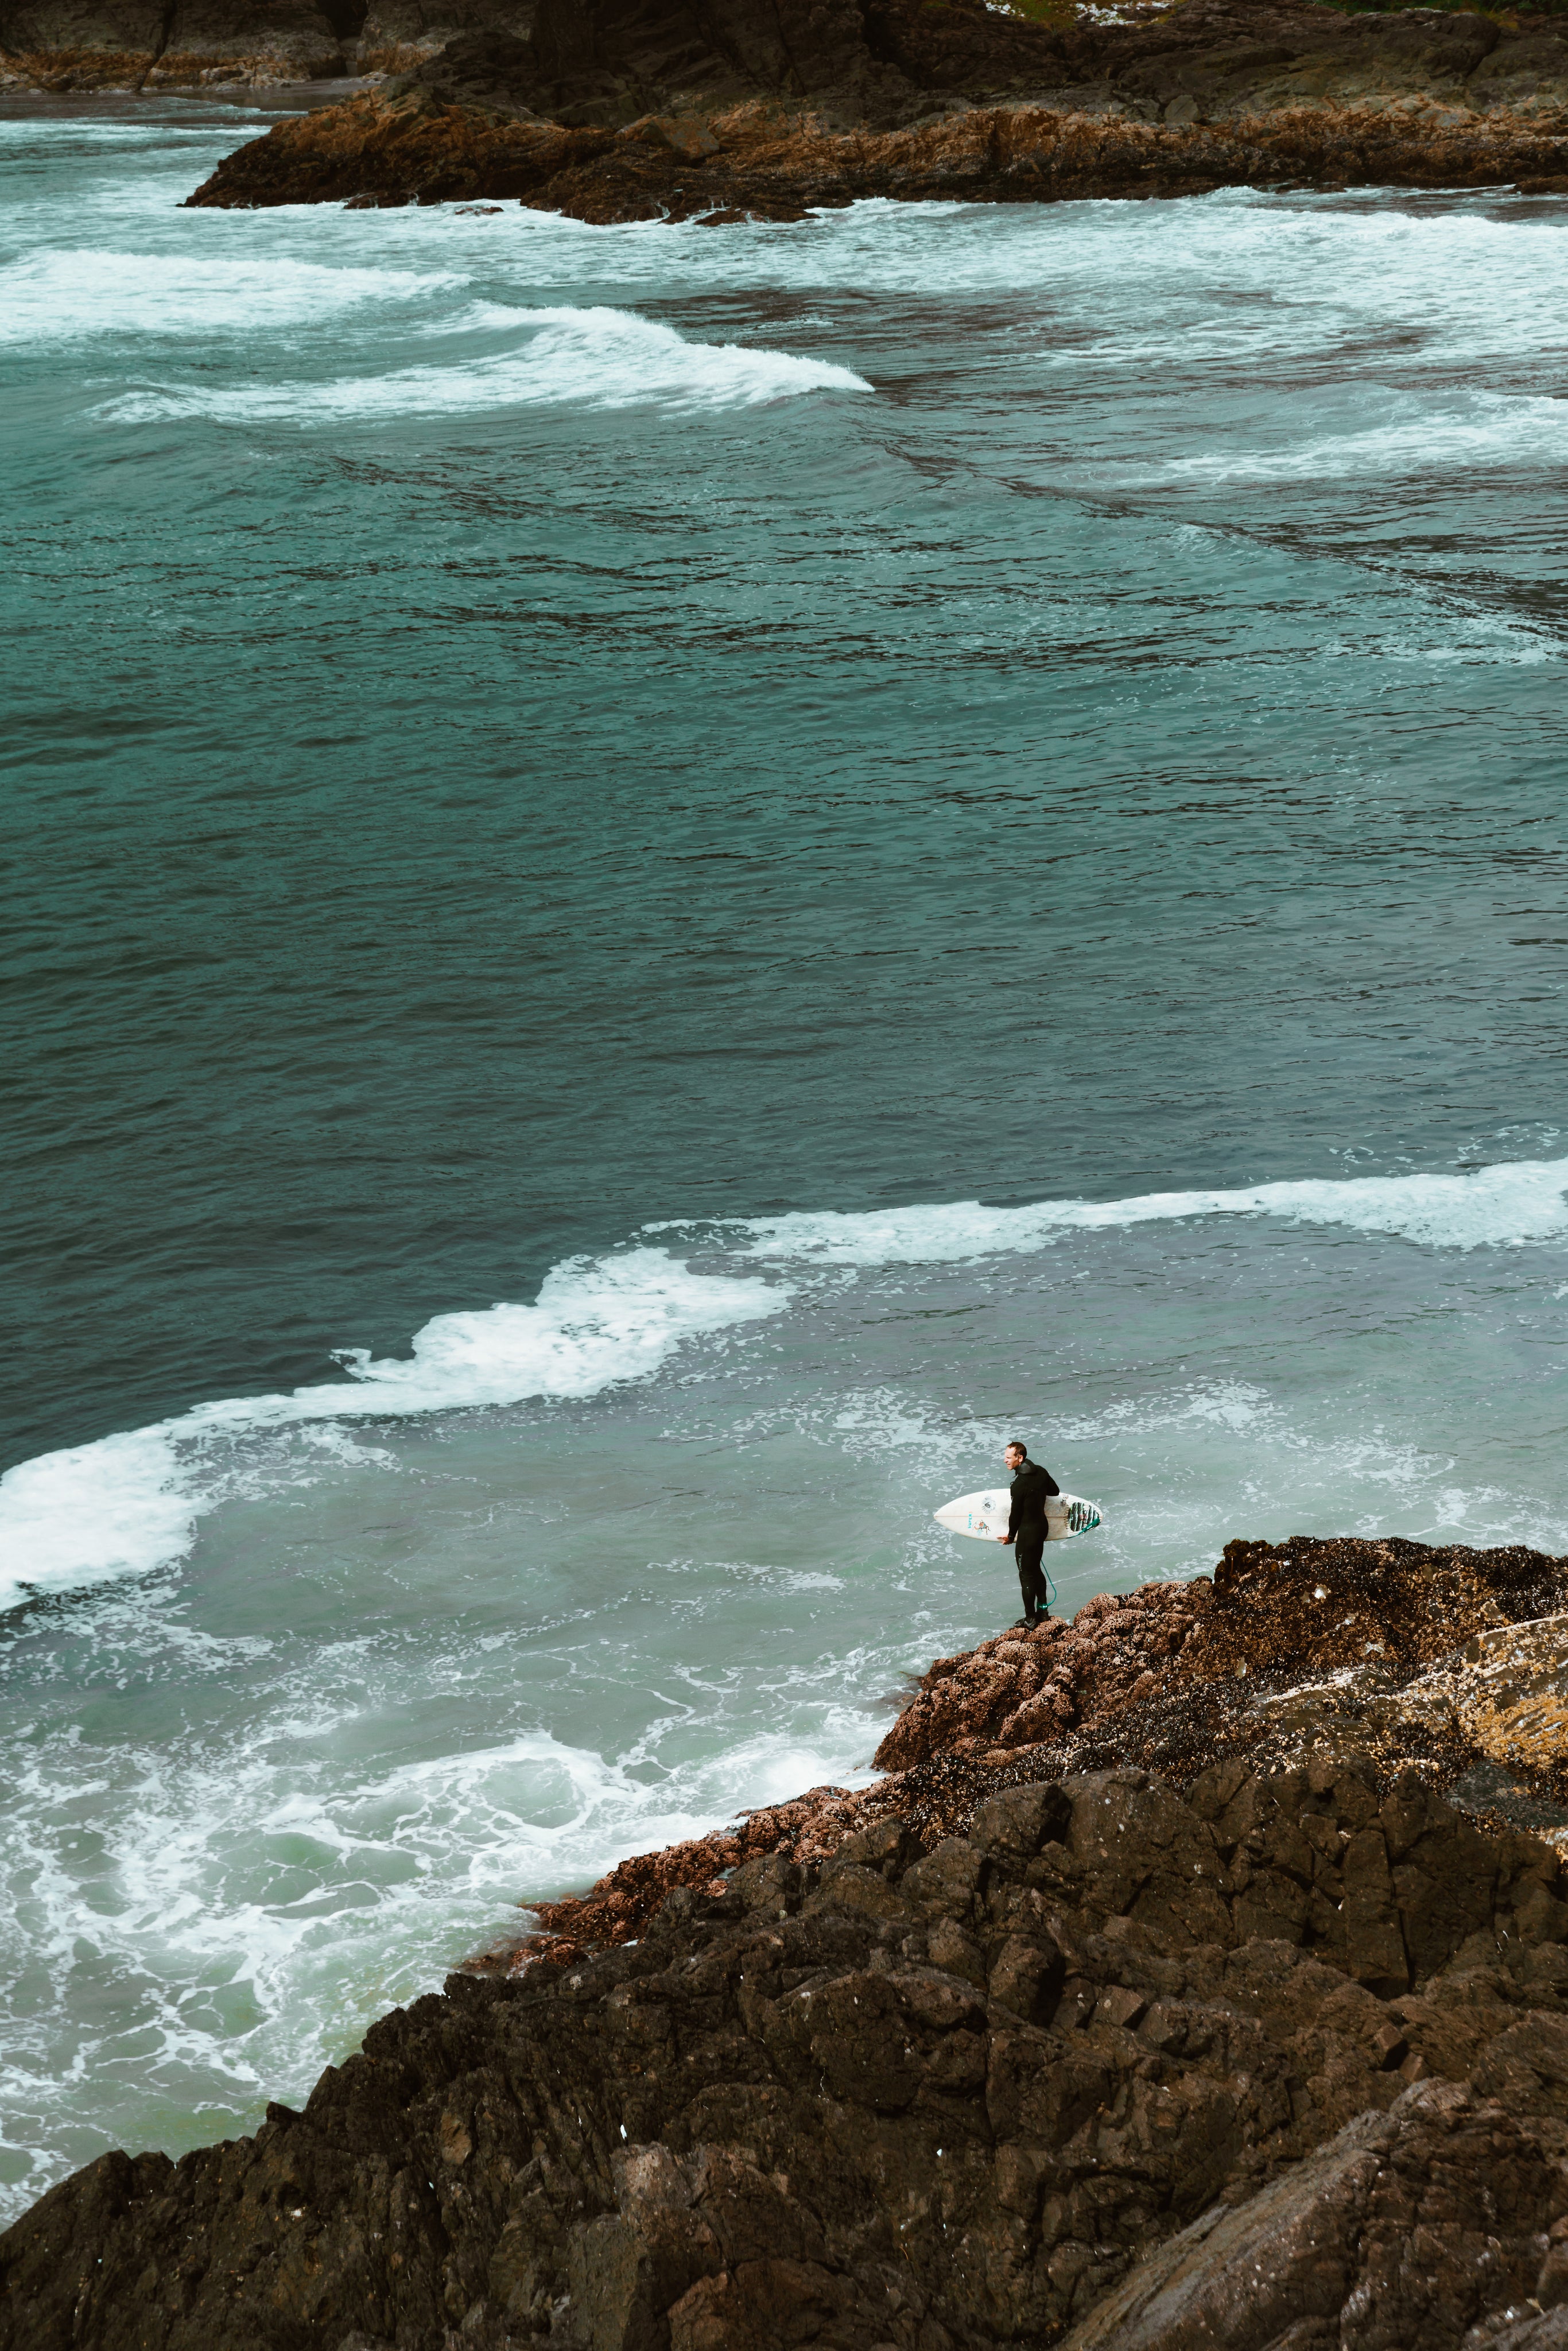 A man holding a surfboard looks out to the sea from a cliff top.